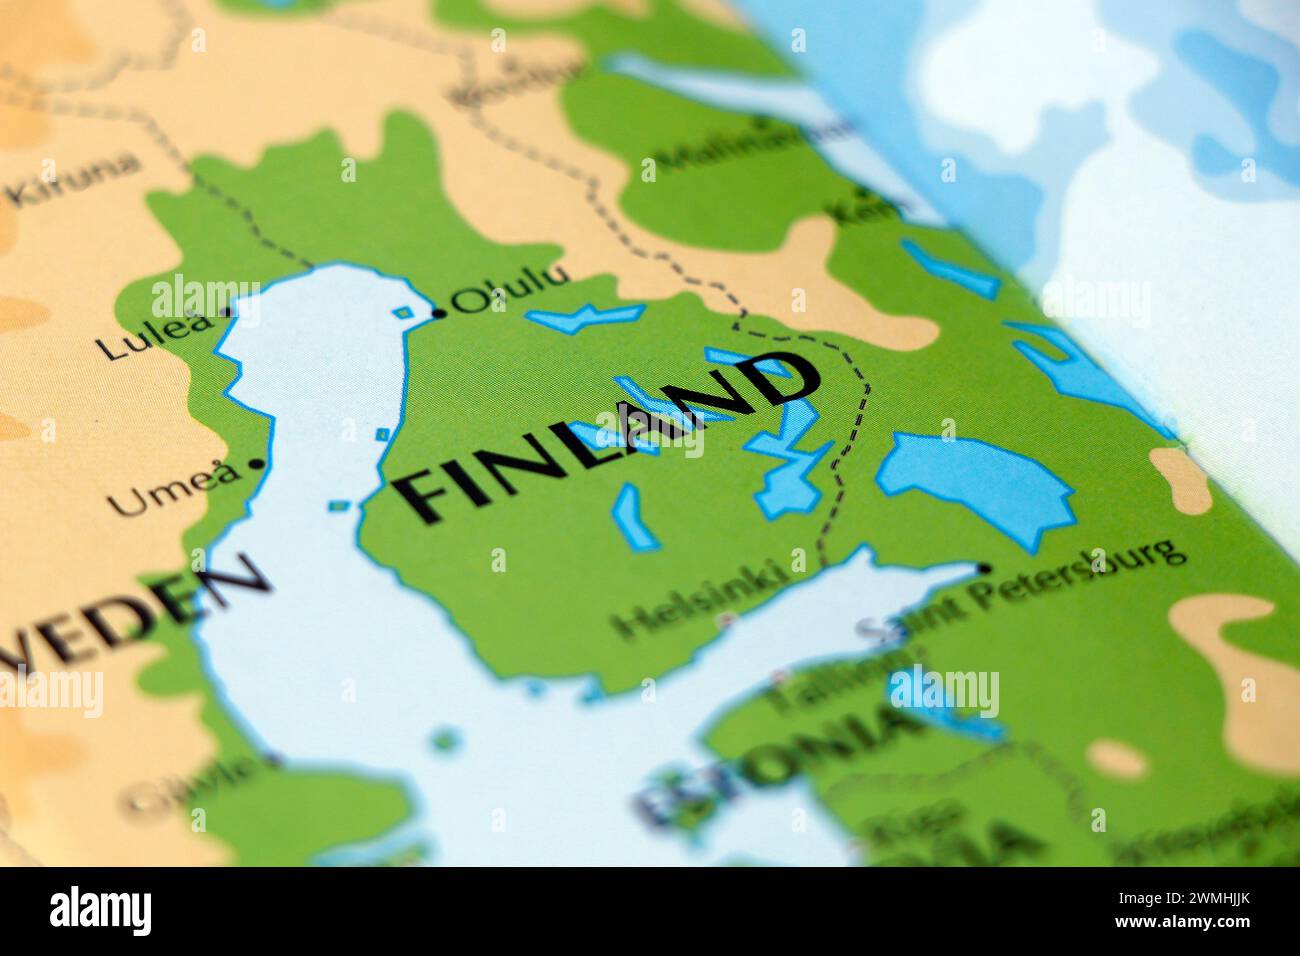 world map location of finland country in close up Stock Photo